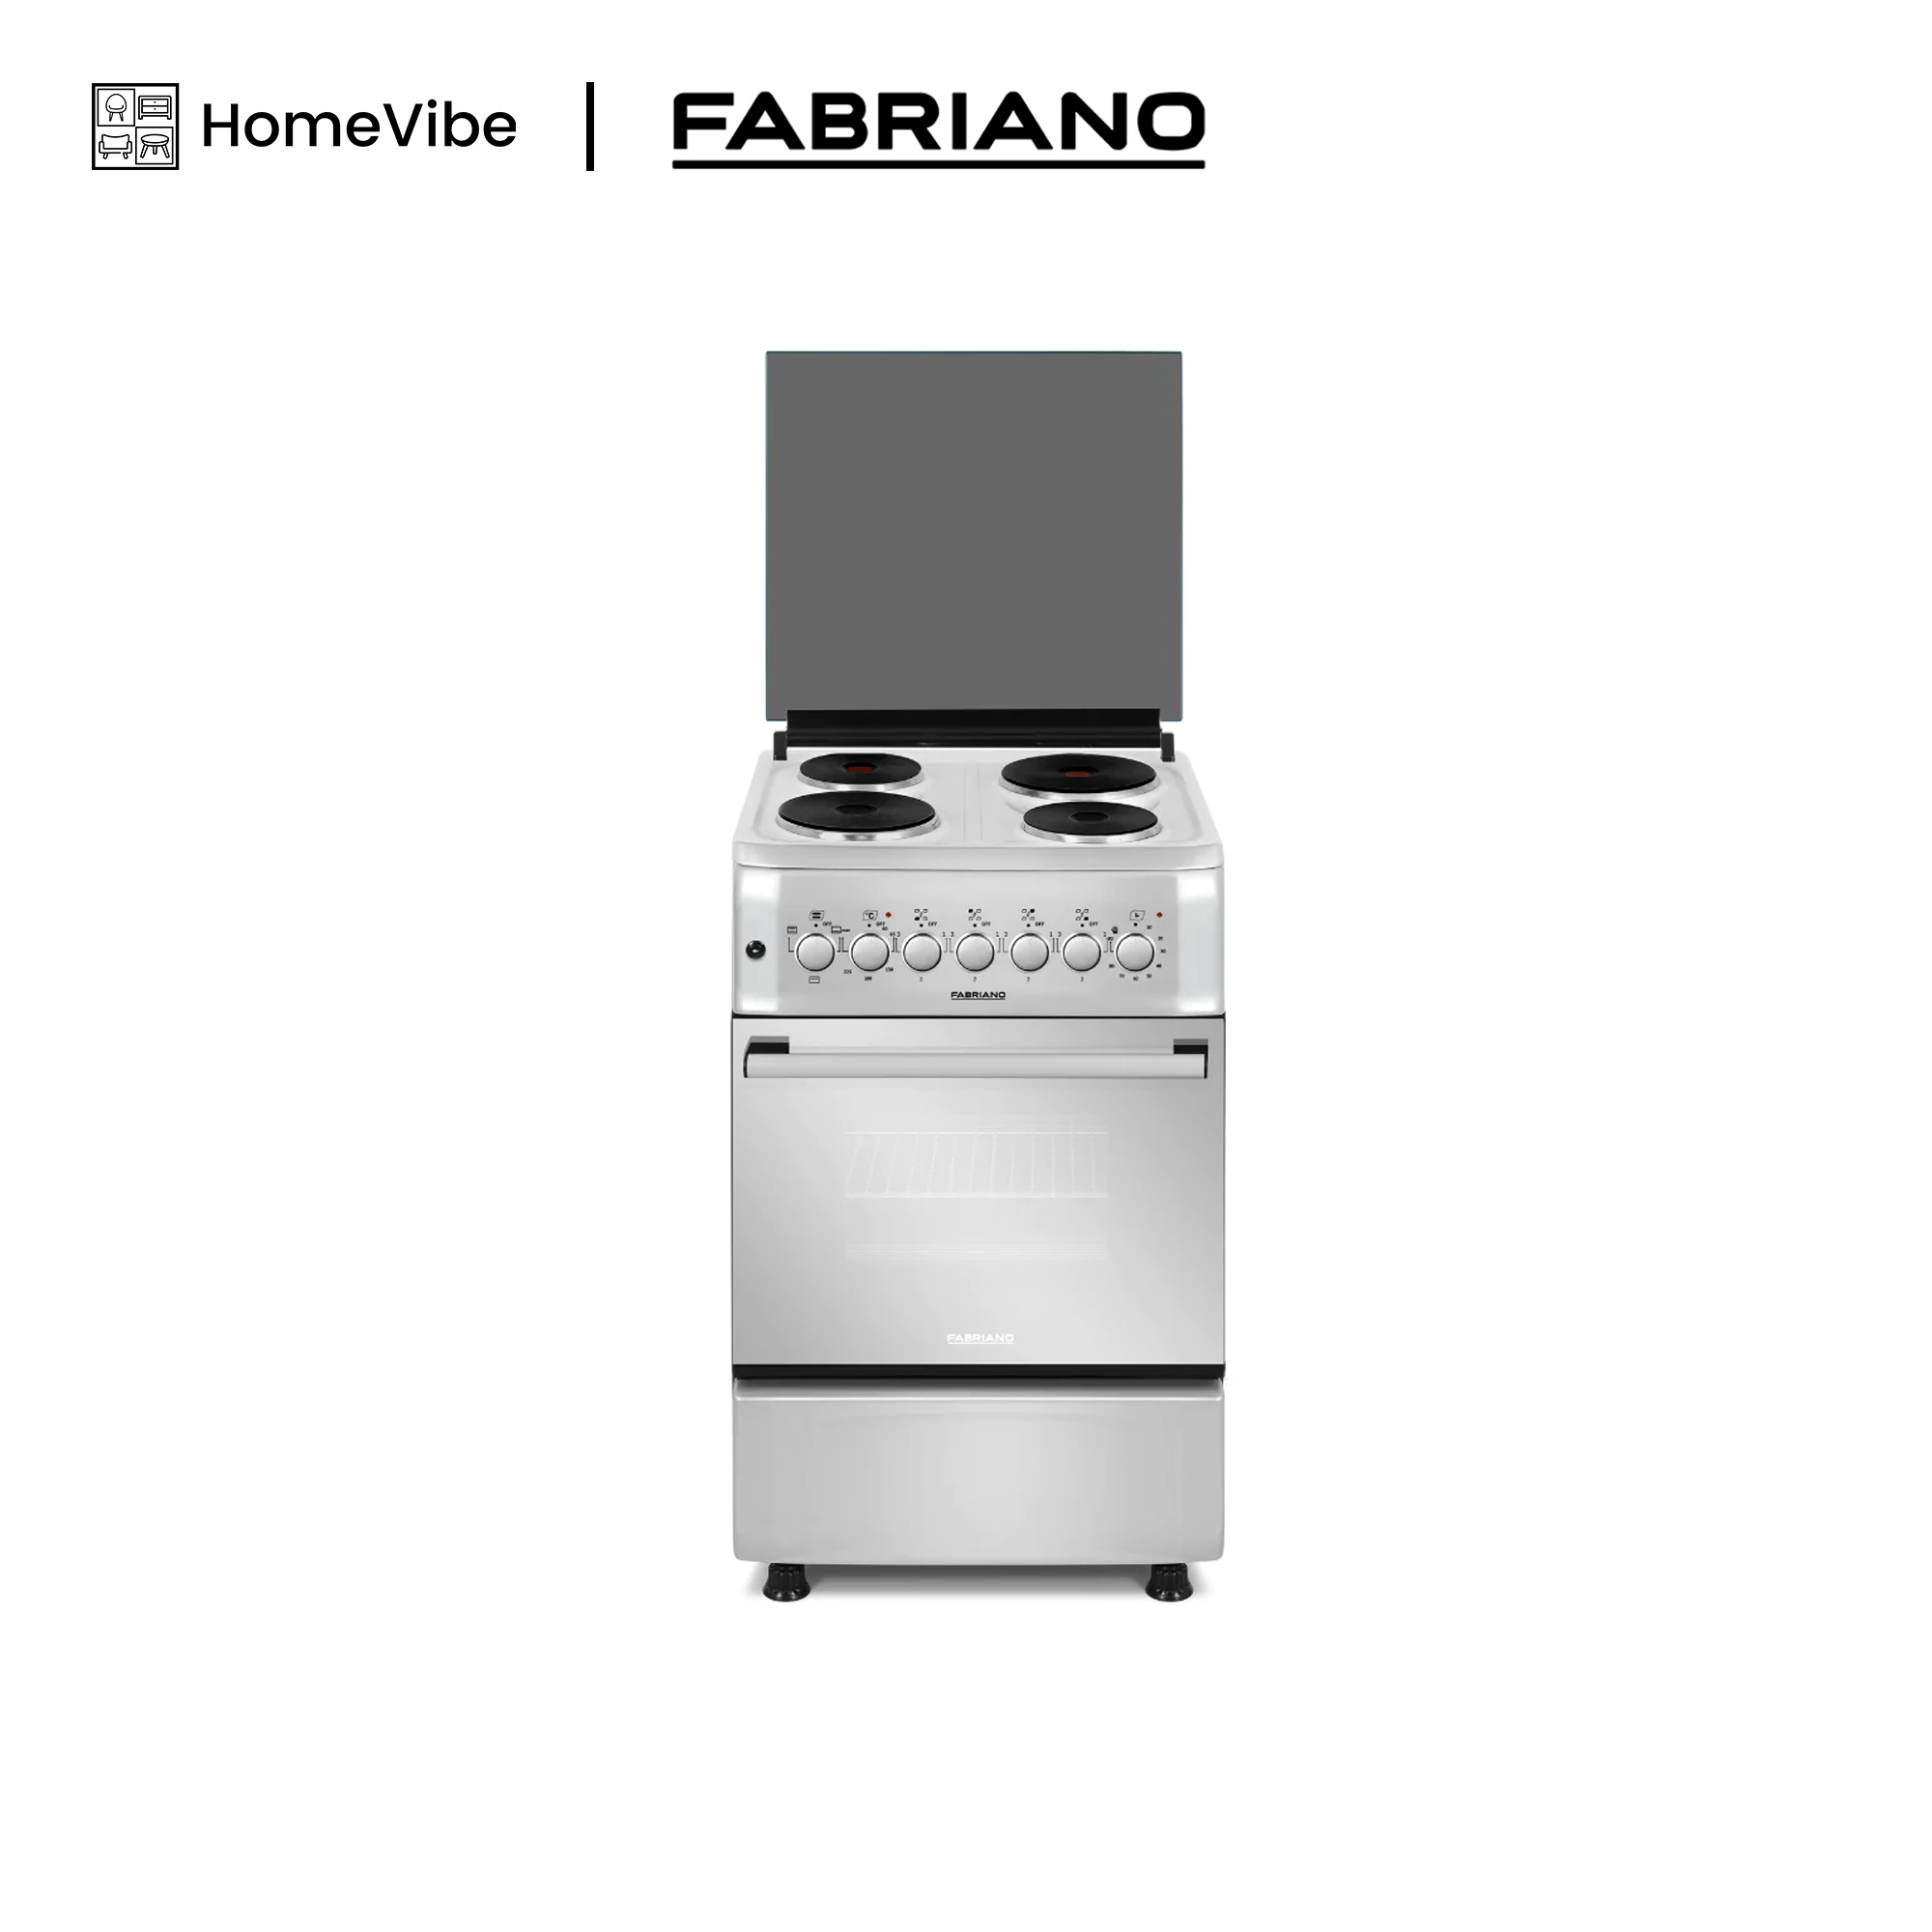 Fabriano 50cm, 4 Electric Plates + Electric Oven Free Standing Cooker F5S04E3-SS